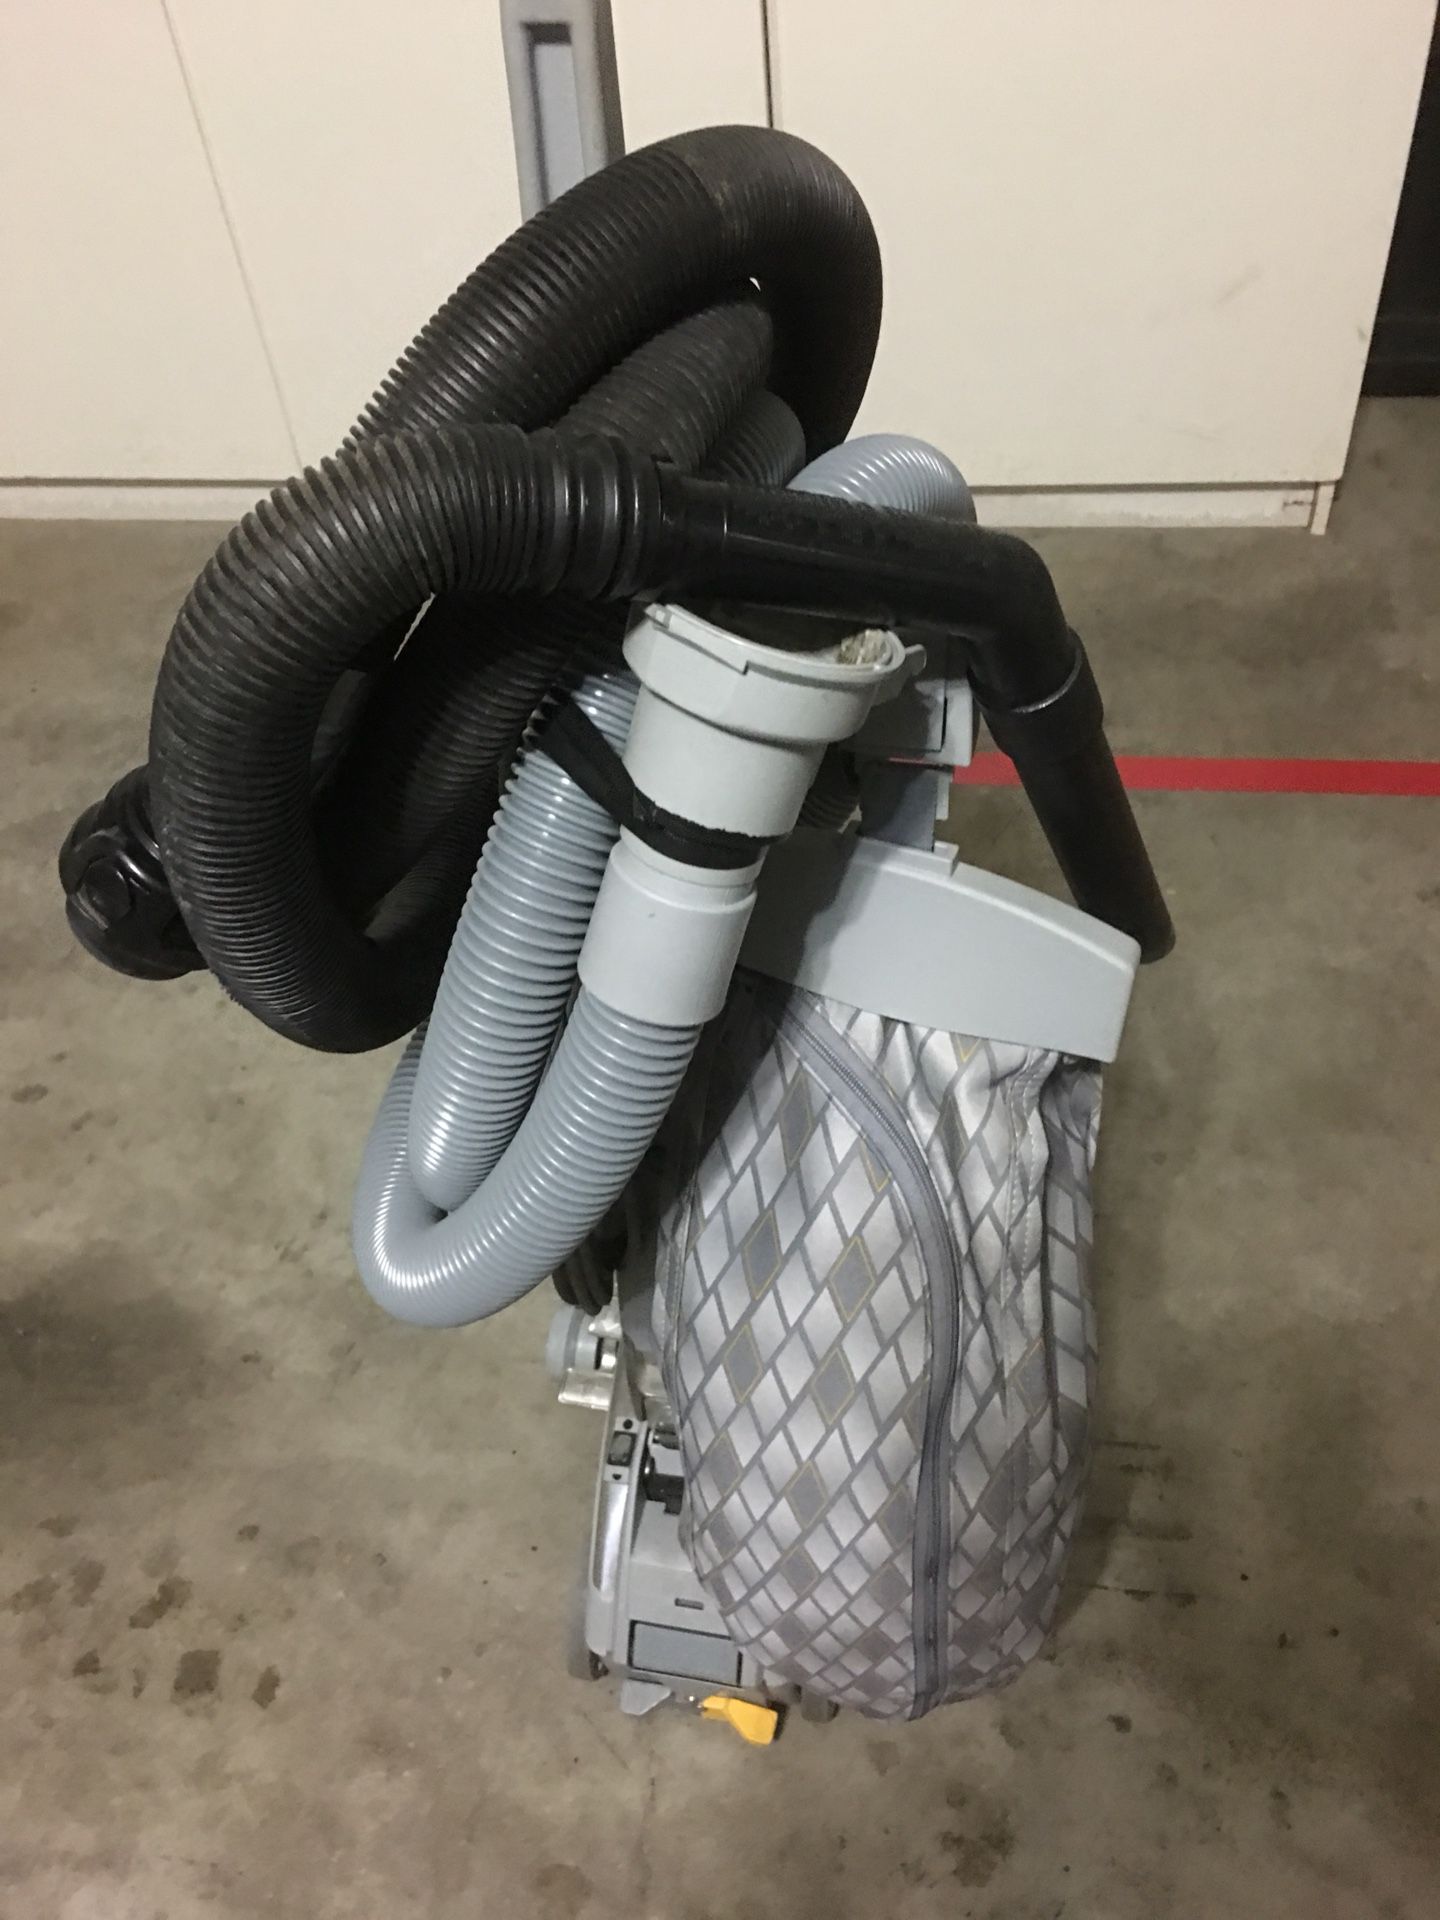 Kirby vacuum with attachment